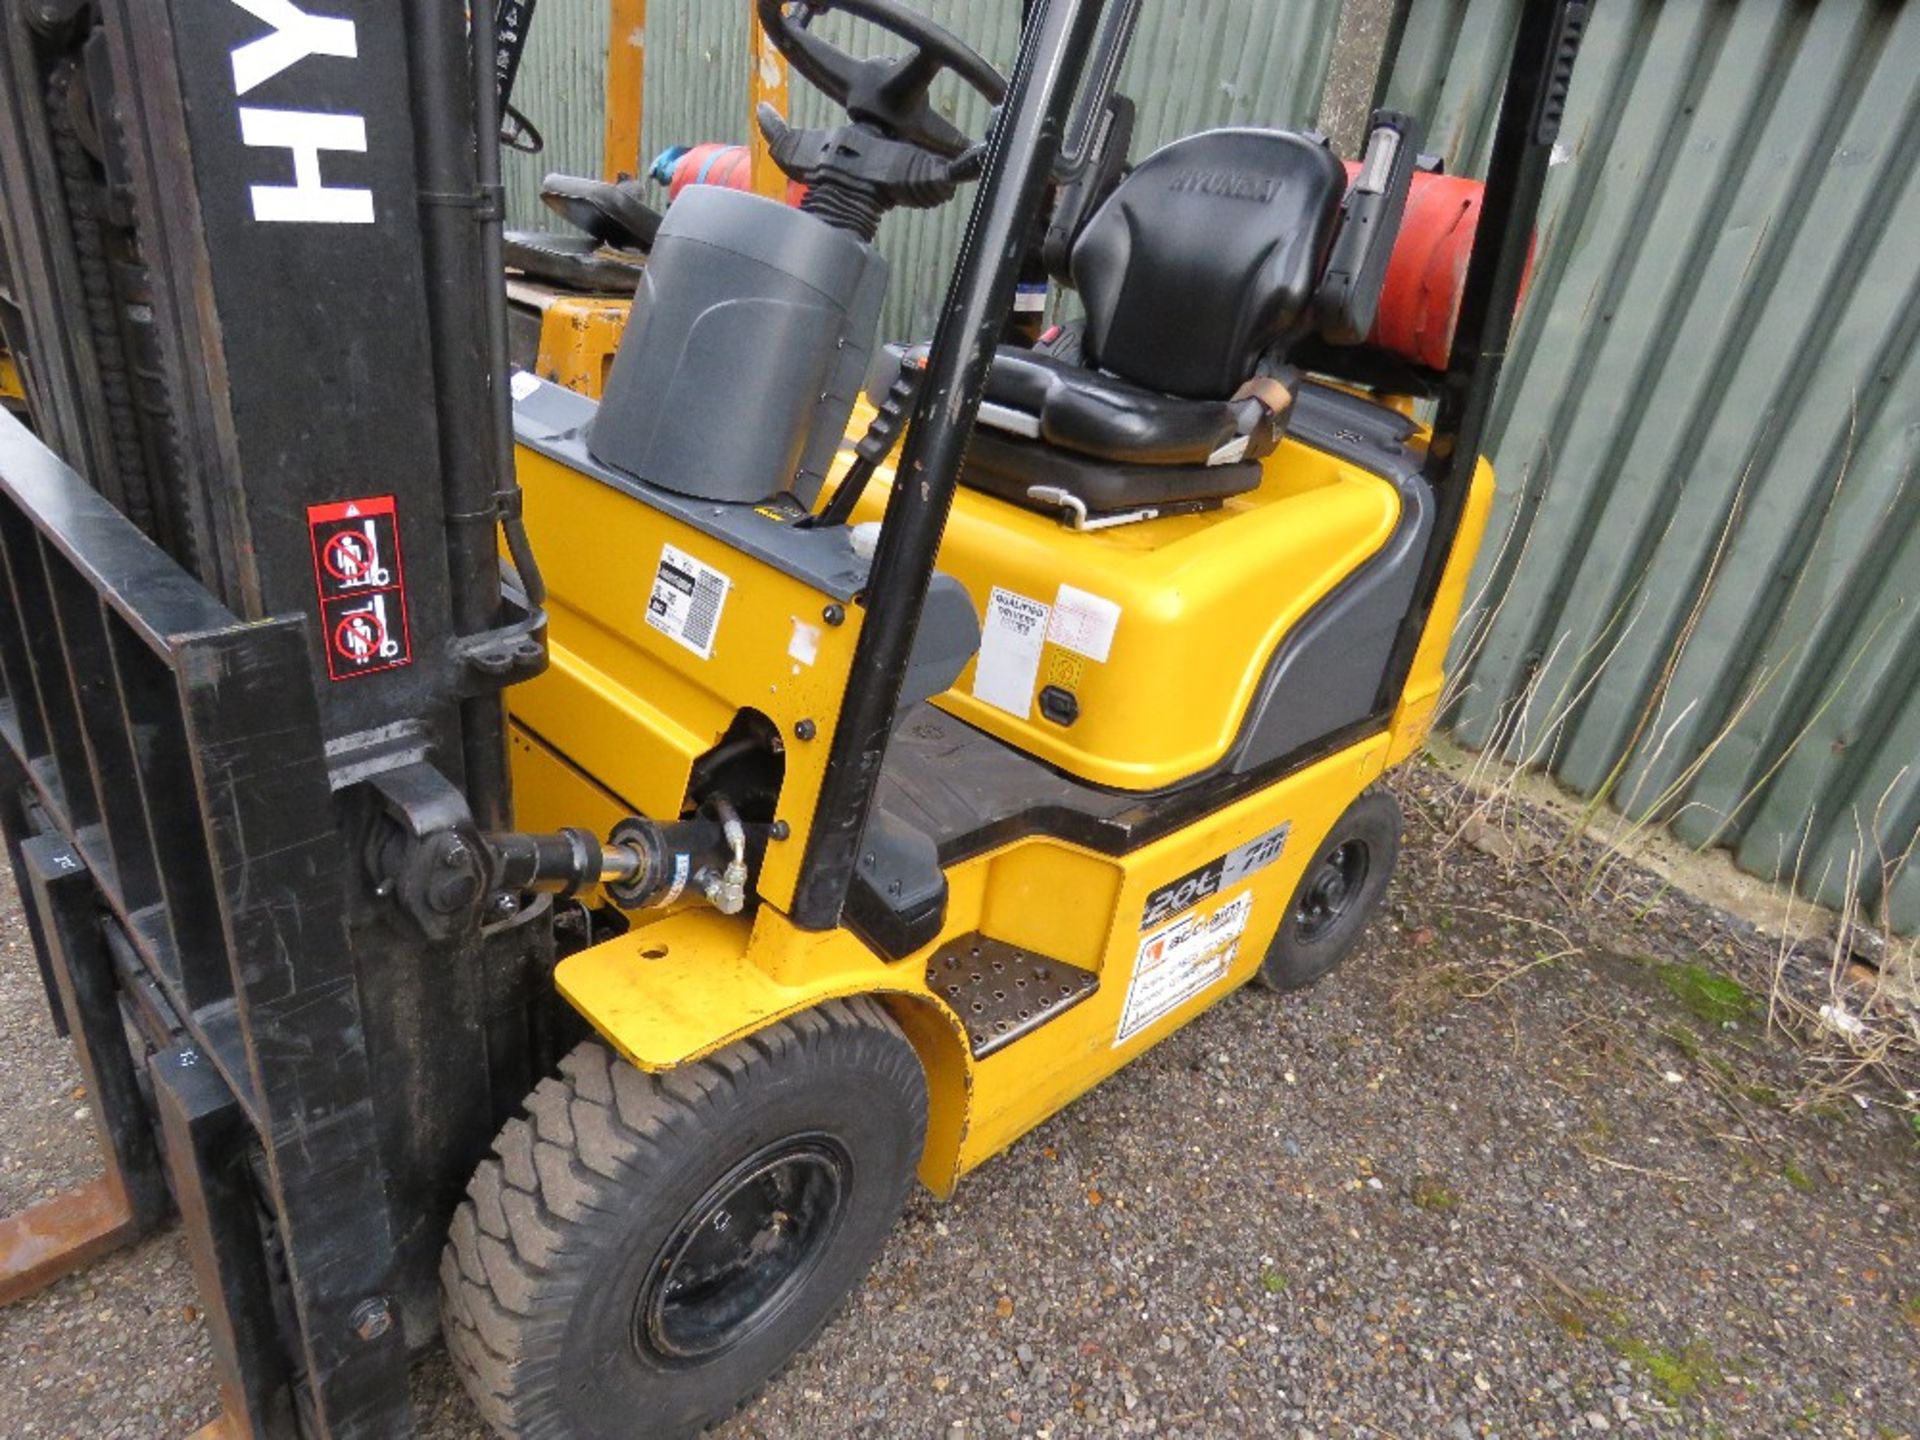 HYUNDAI 20L-7M GAS POWERED 2 TONNE FORKLIFT TRUCK. YEAR 2018 BUILD, LITTLE USED RECENTLY. - Image 4 of 12